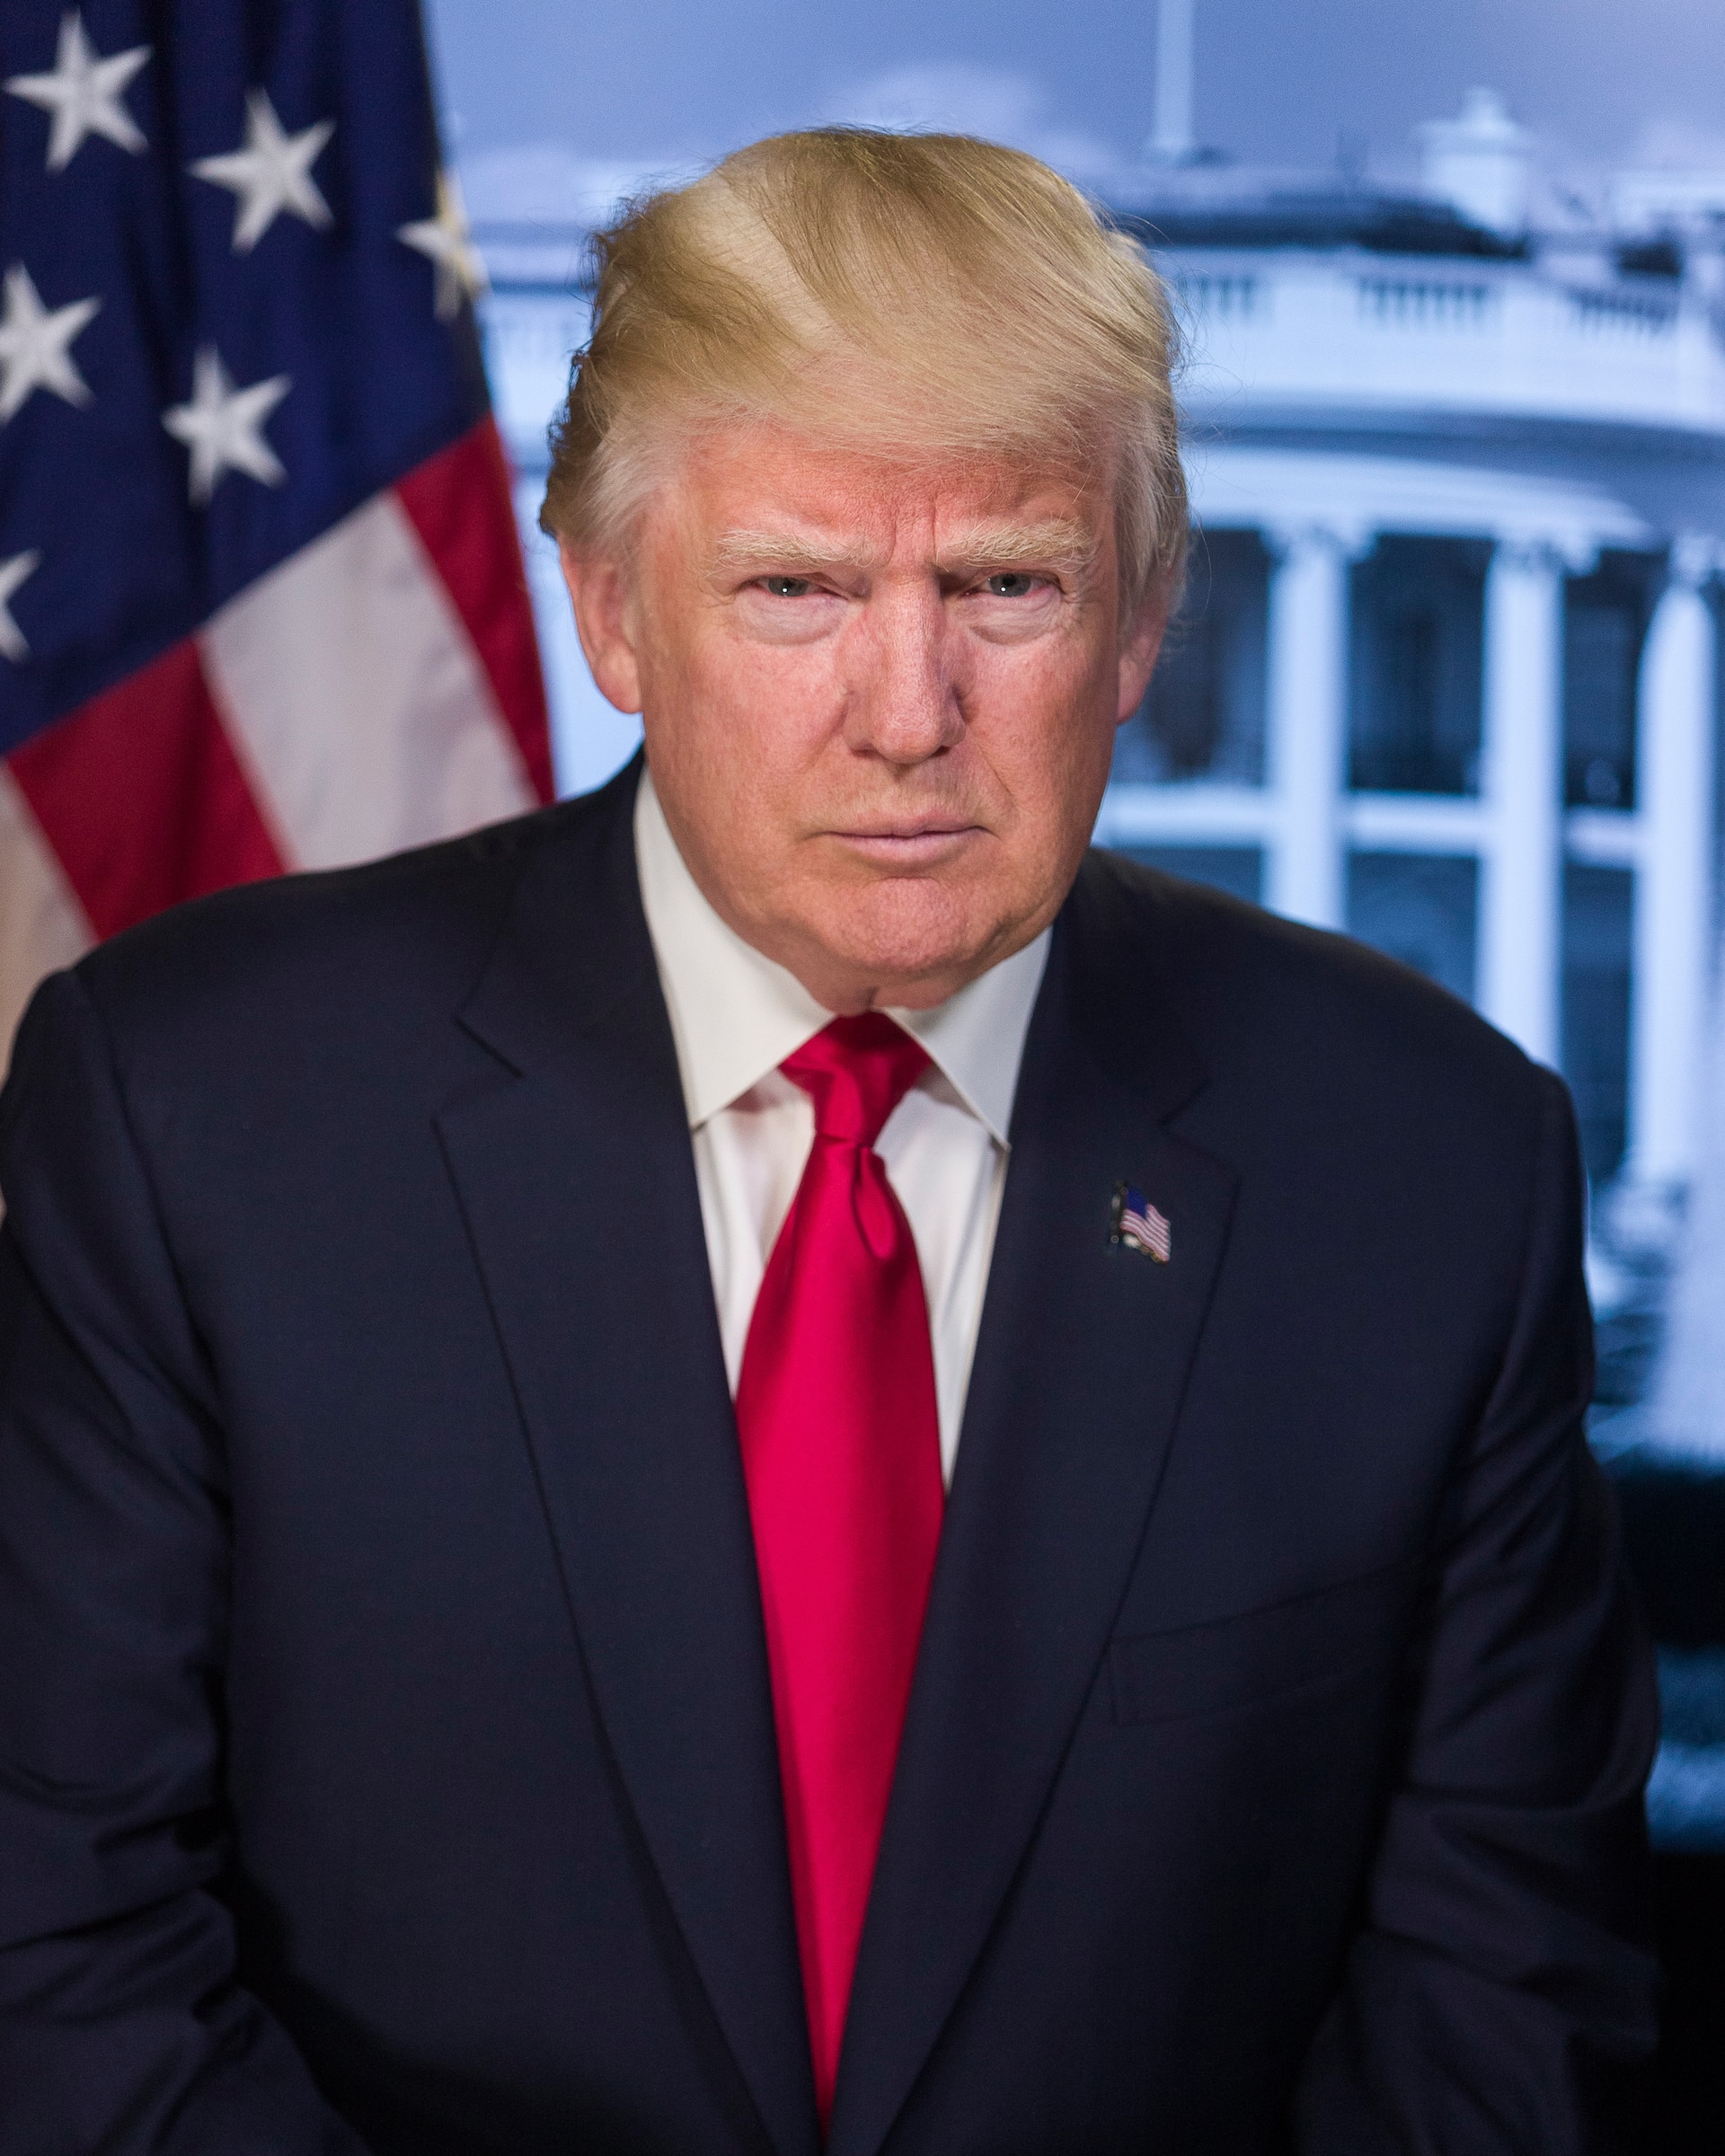 Former President Trump’s Potential Re-Election Could Ignite Crypto Sector, Says Bernstein